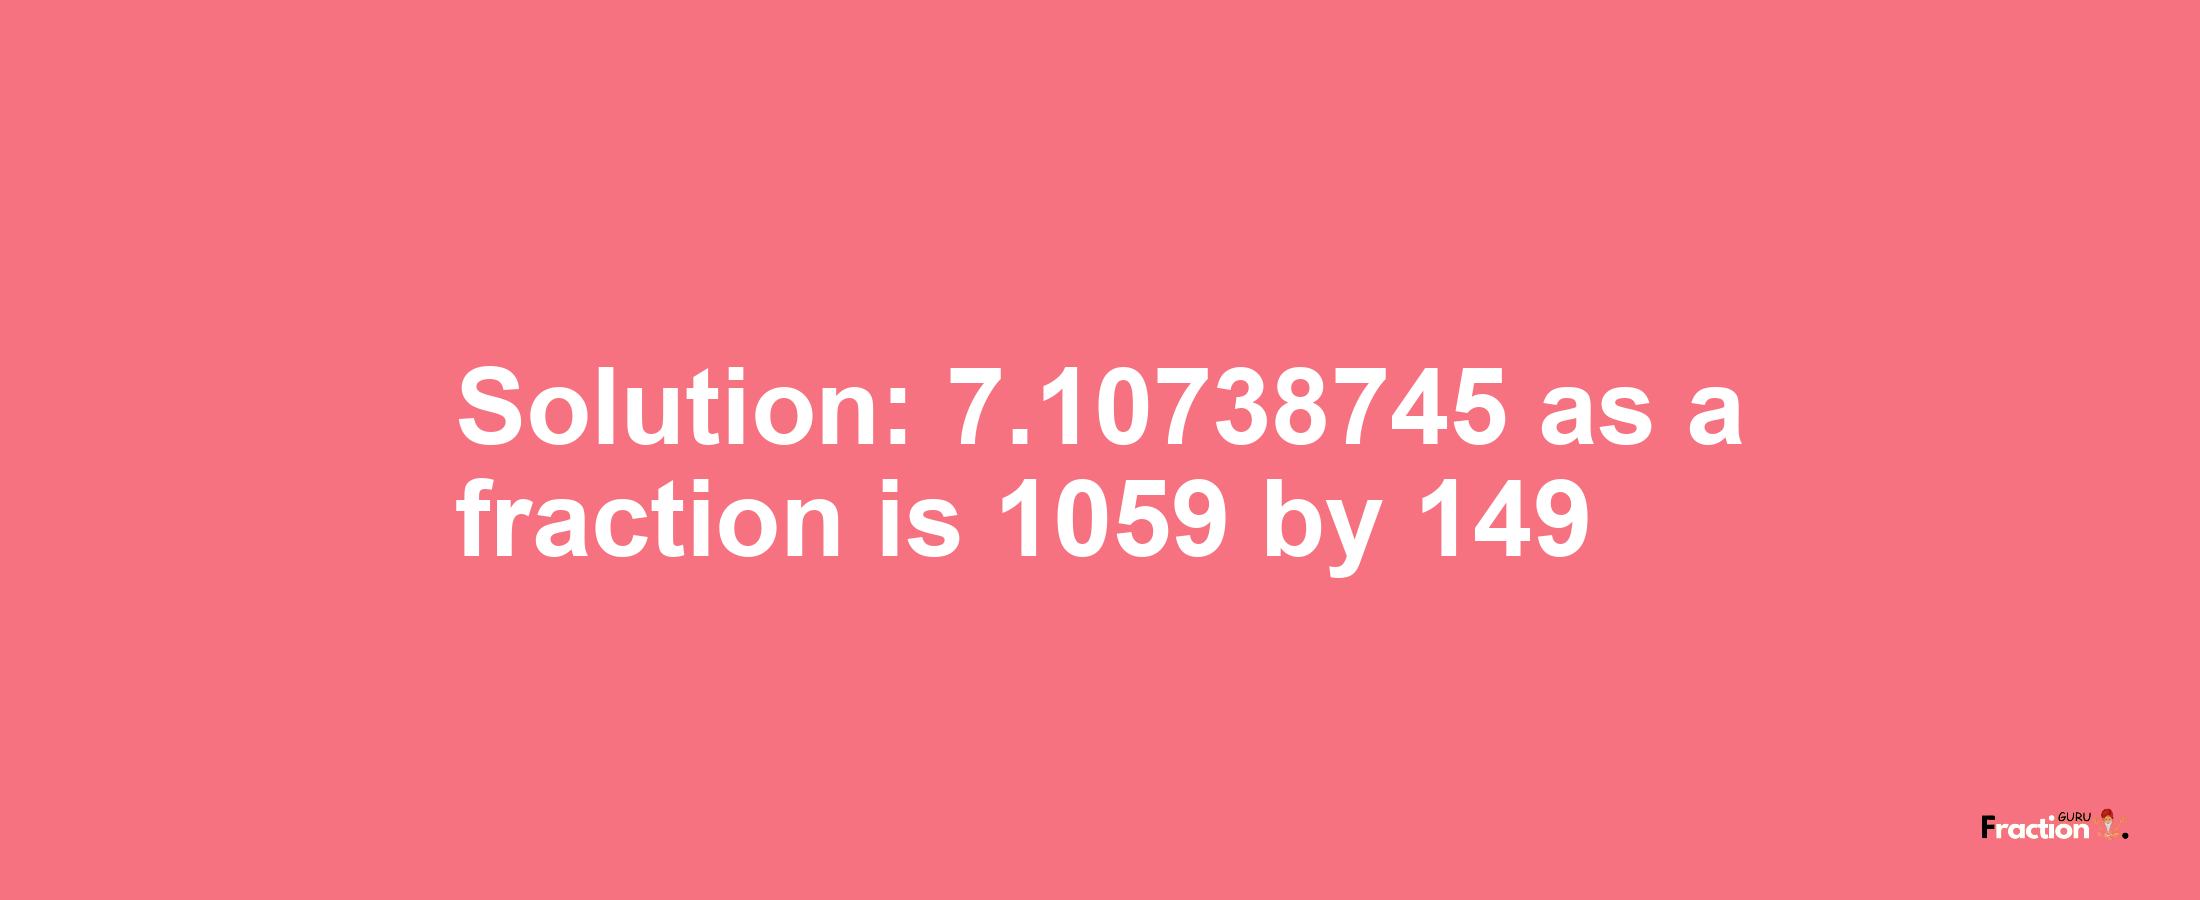 Solution:7.10738745 as a fraction is 1059/149